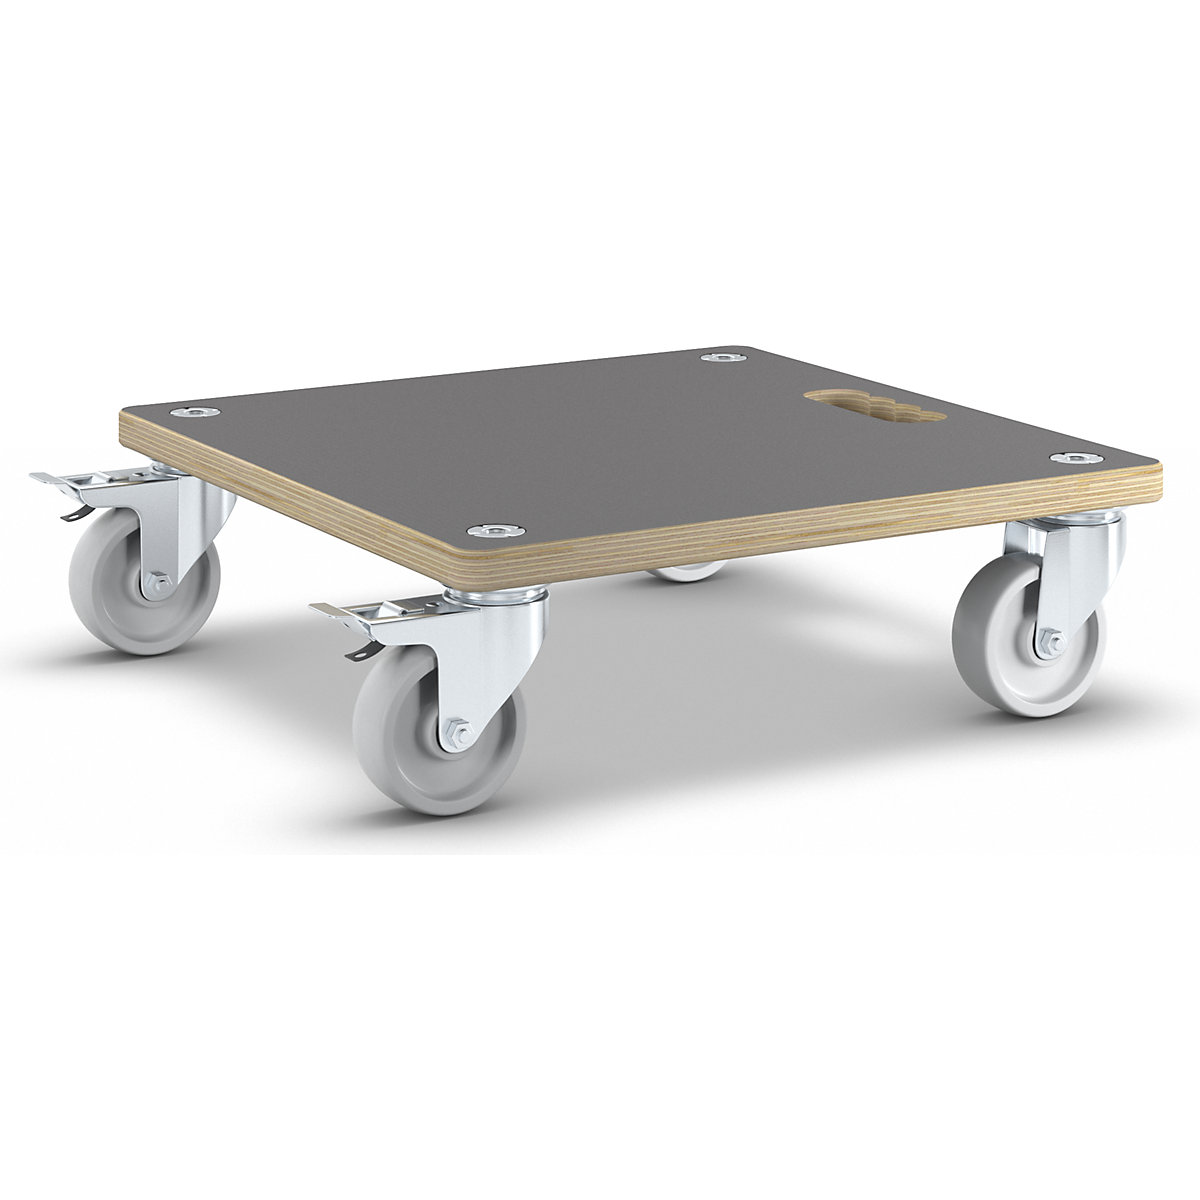 MaxiGRIP transport dolly - Wagner